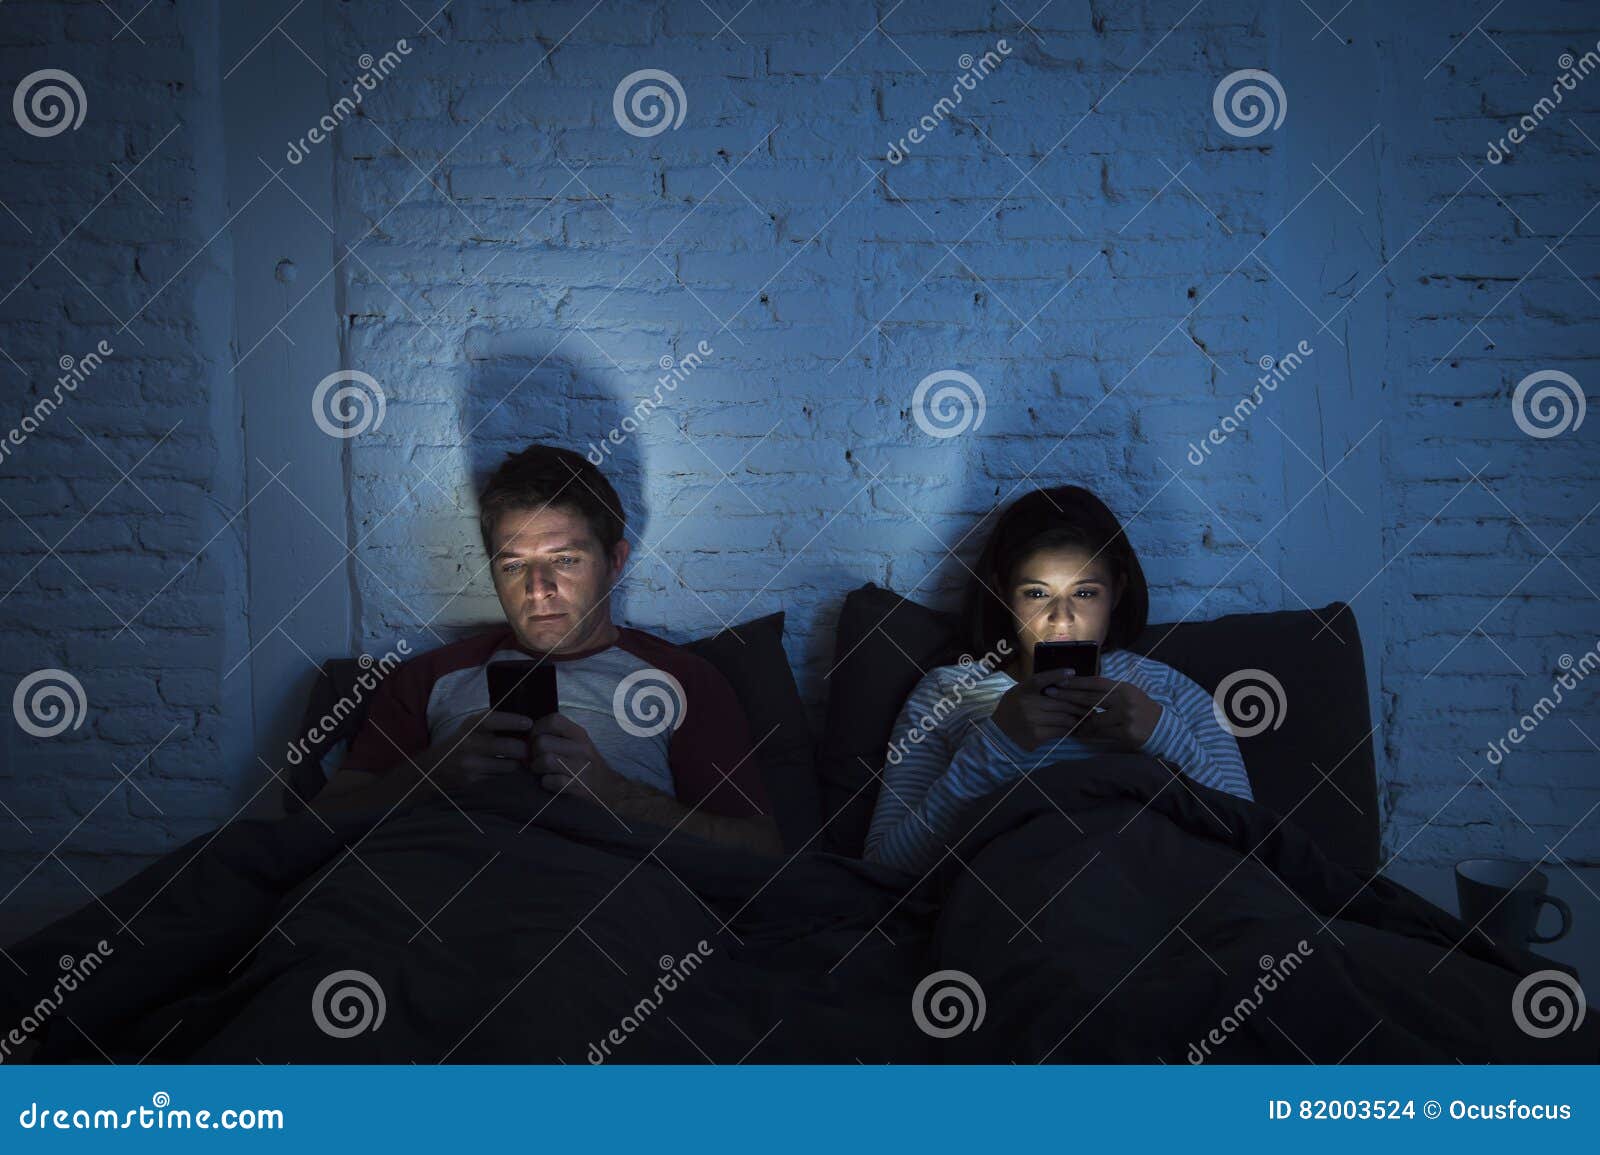 couple at home in bed late at night using mobile phone in relationship communication problem